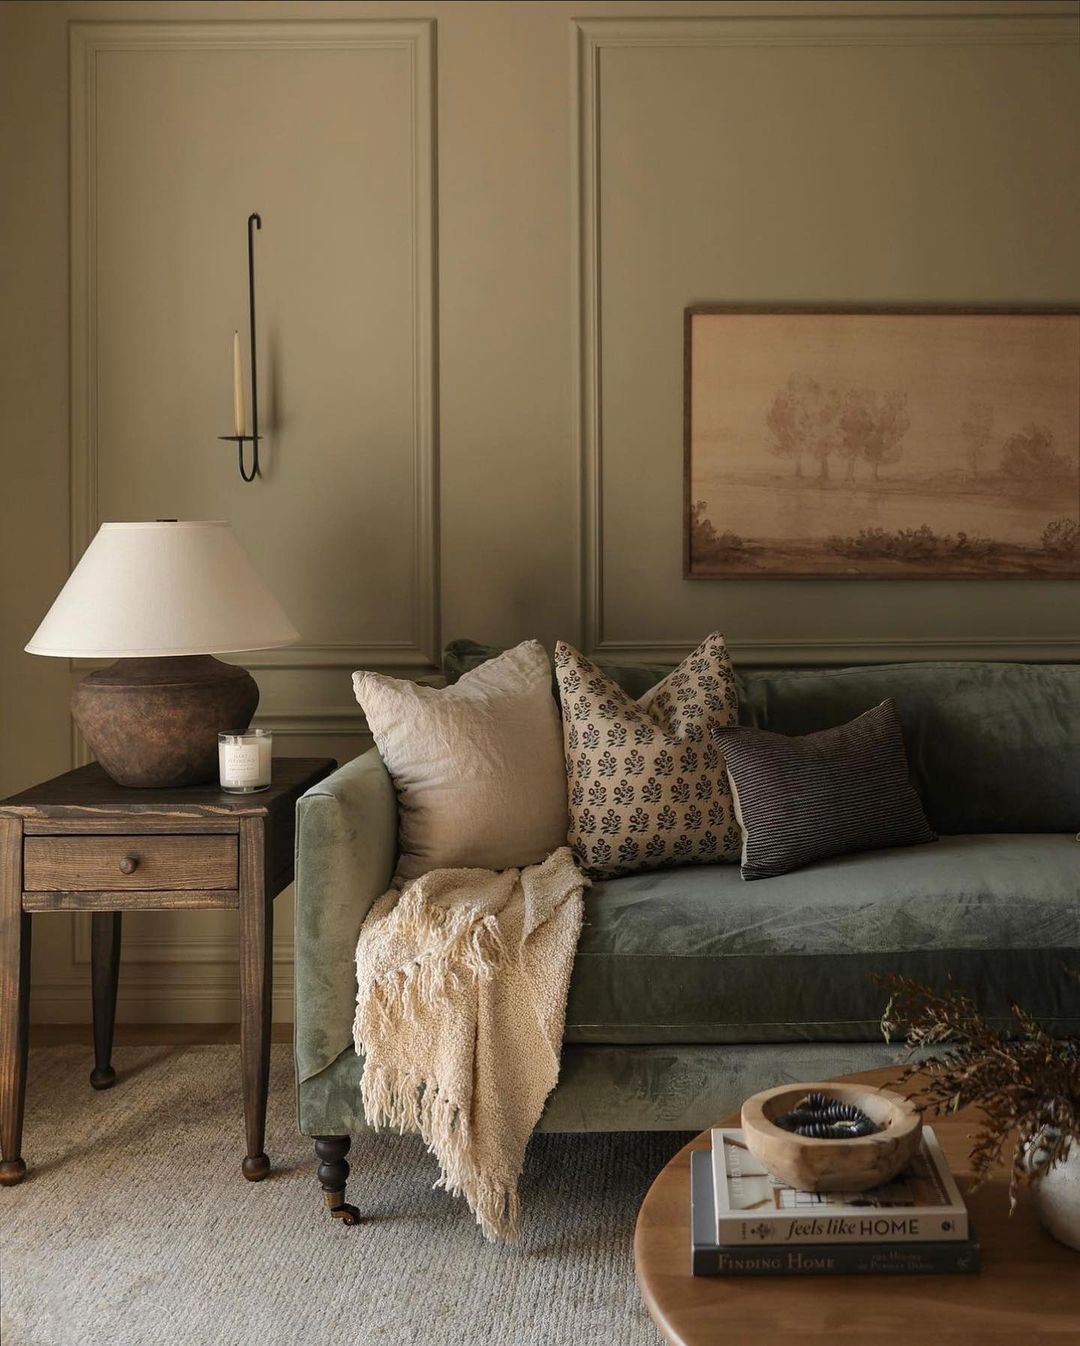 colors and textures play a crucial role in styling a rustic living room couch